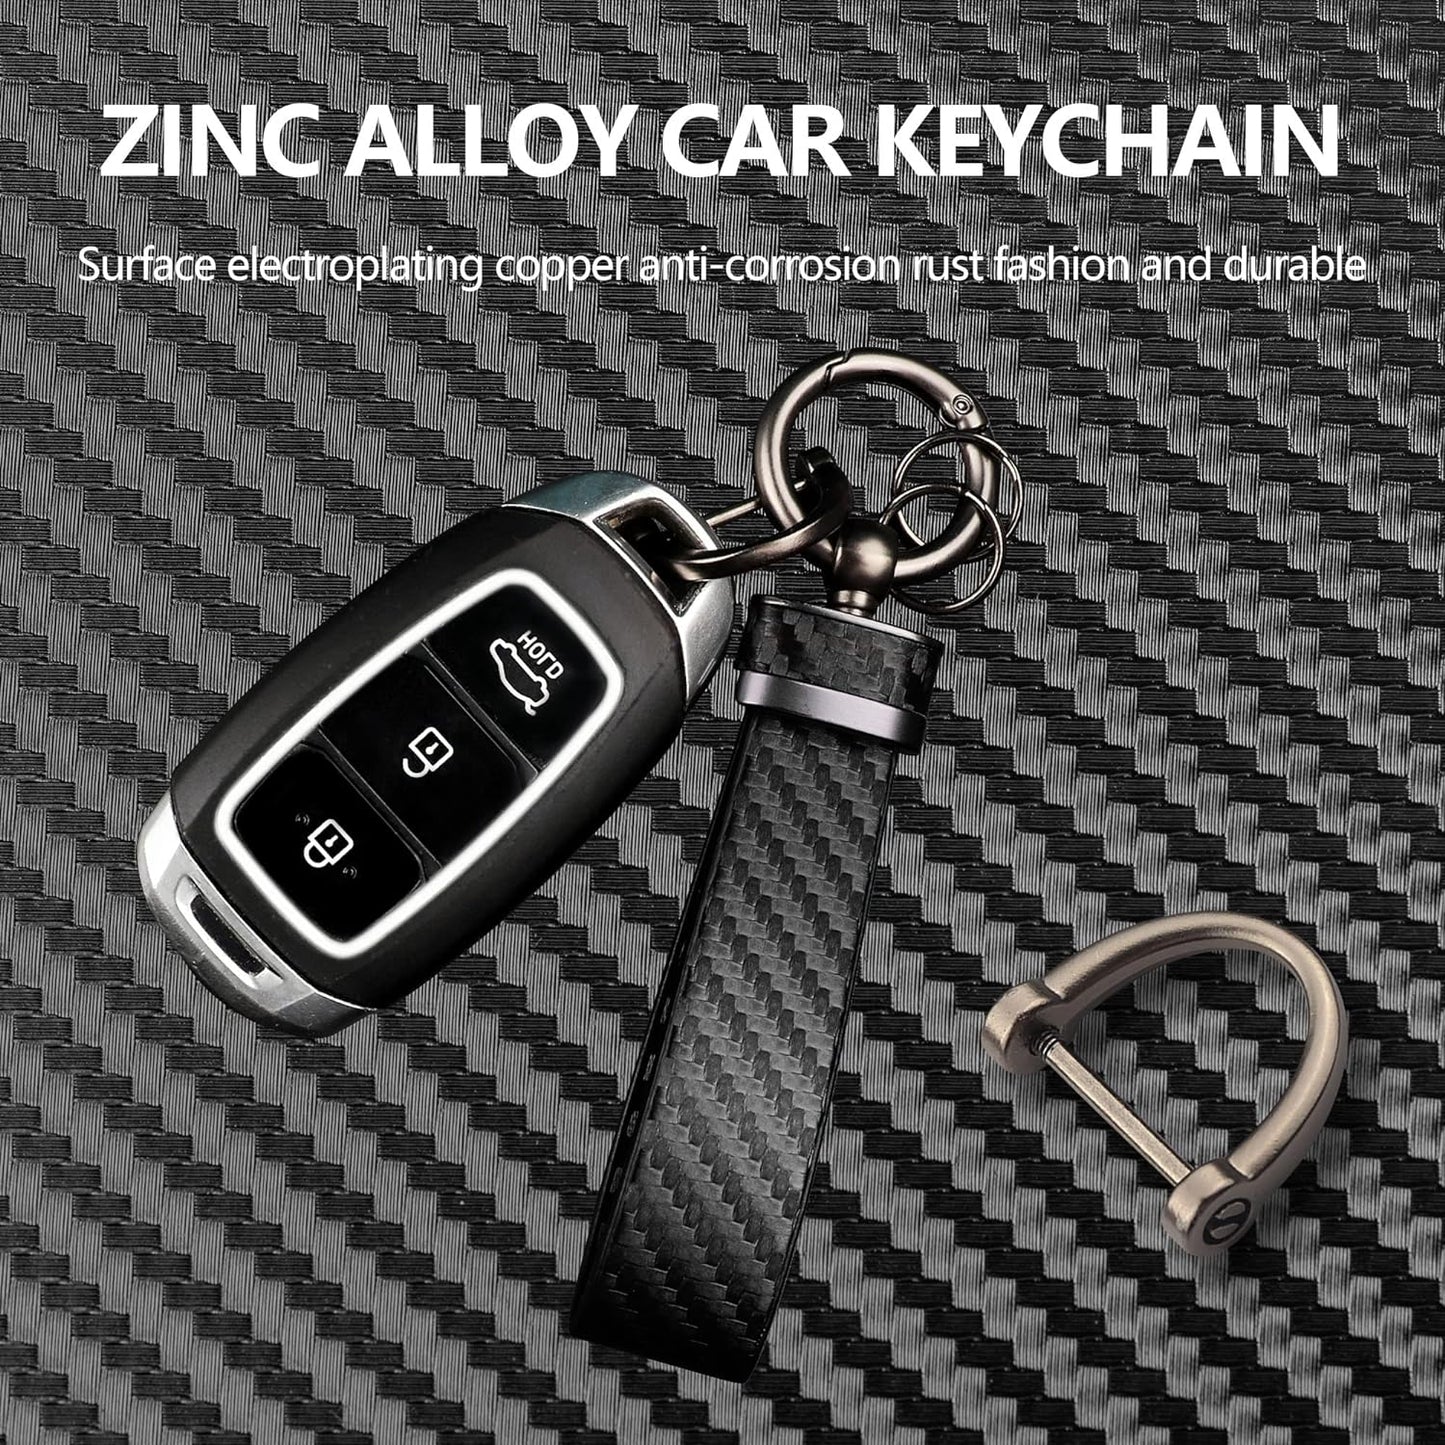 Leather Car Keychain - Carbon Fiber Interior Key Fob with Anti-Lost D-Ring - Car Accessory Key Ring (Black)